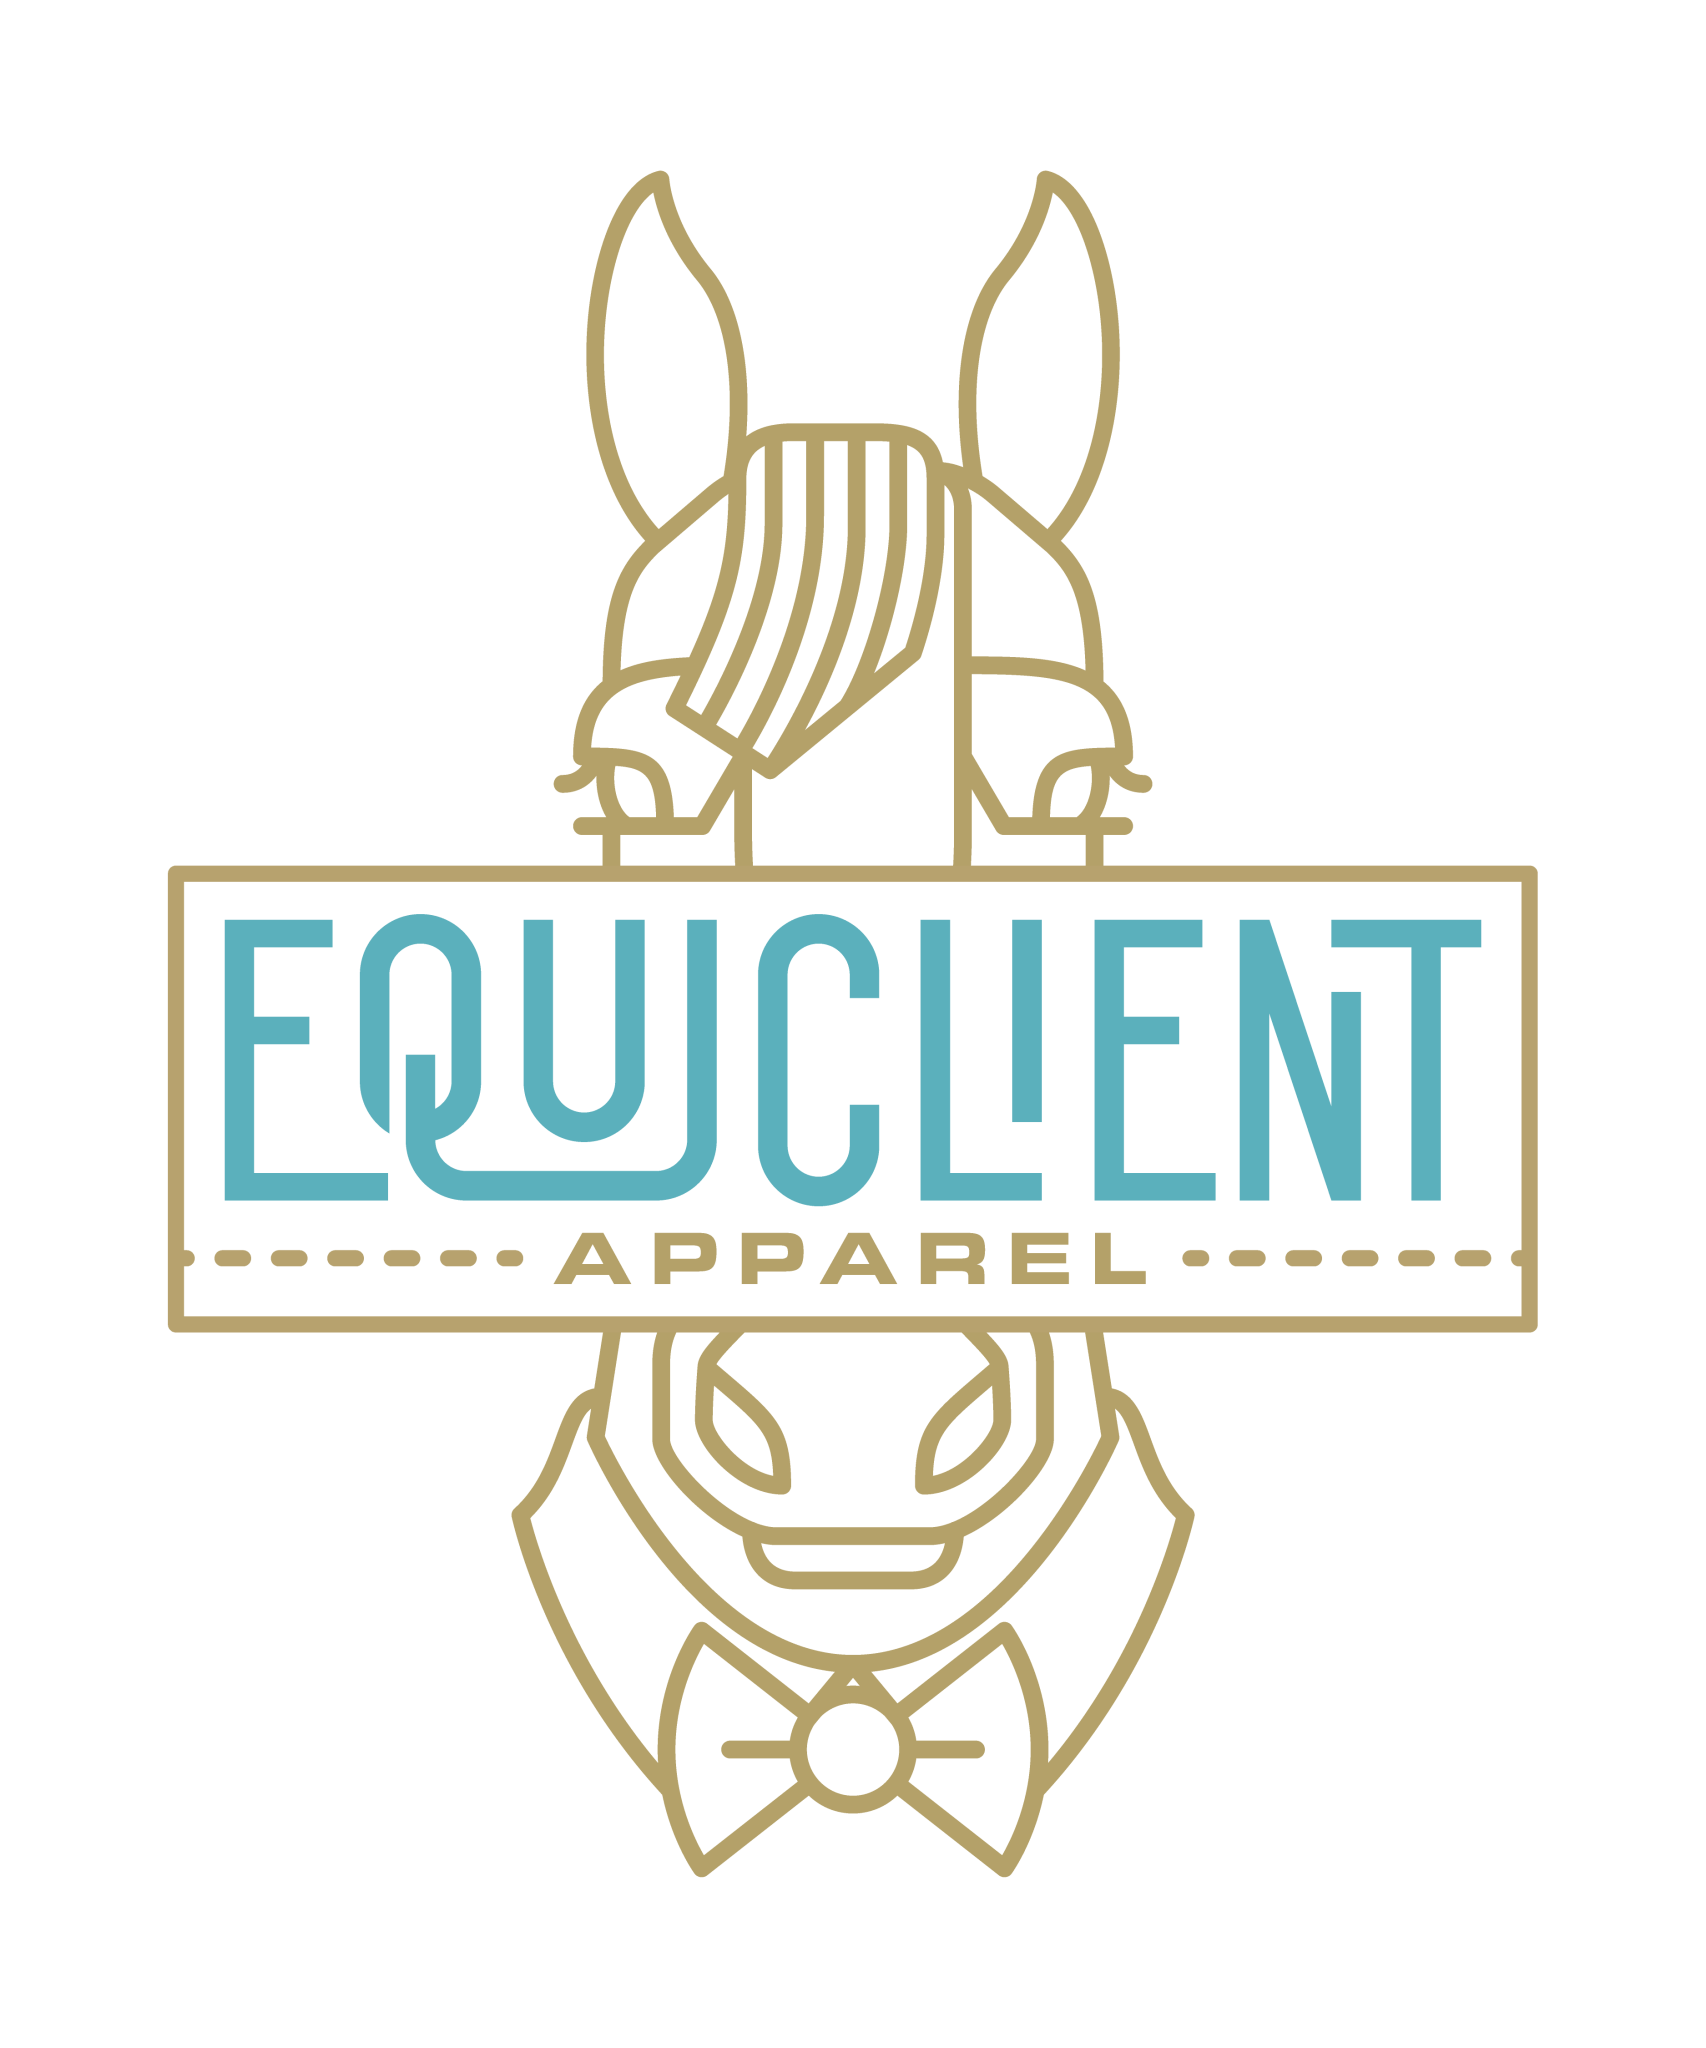 Equiclient Setup Fee - Equiclient Apparel